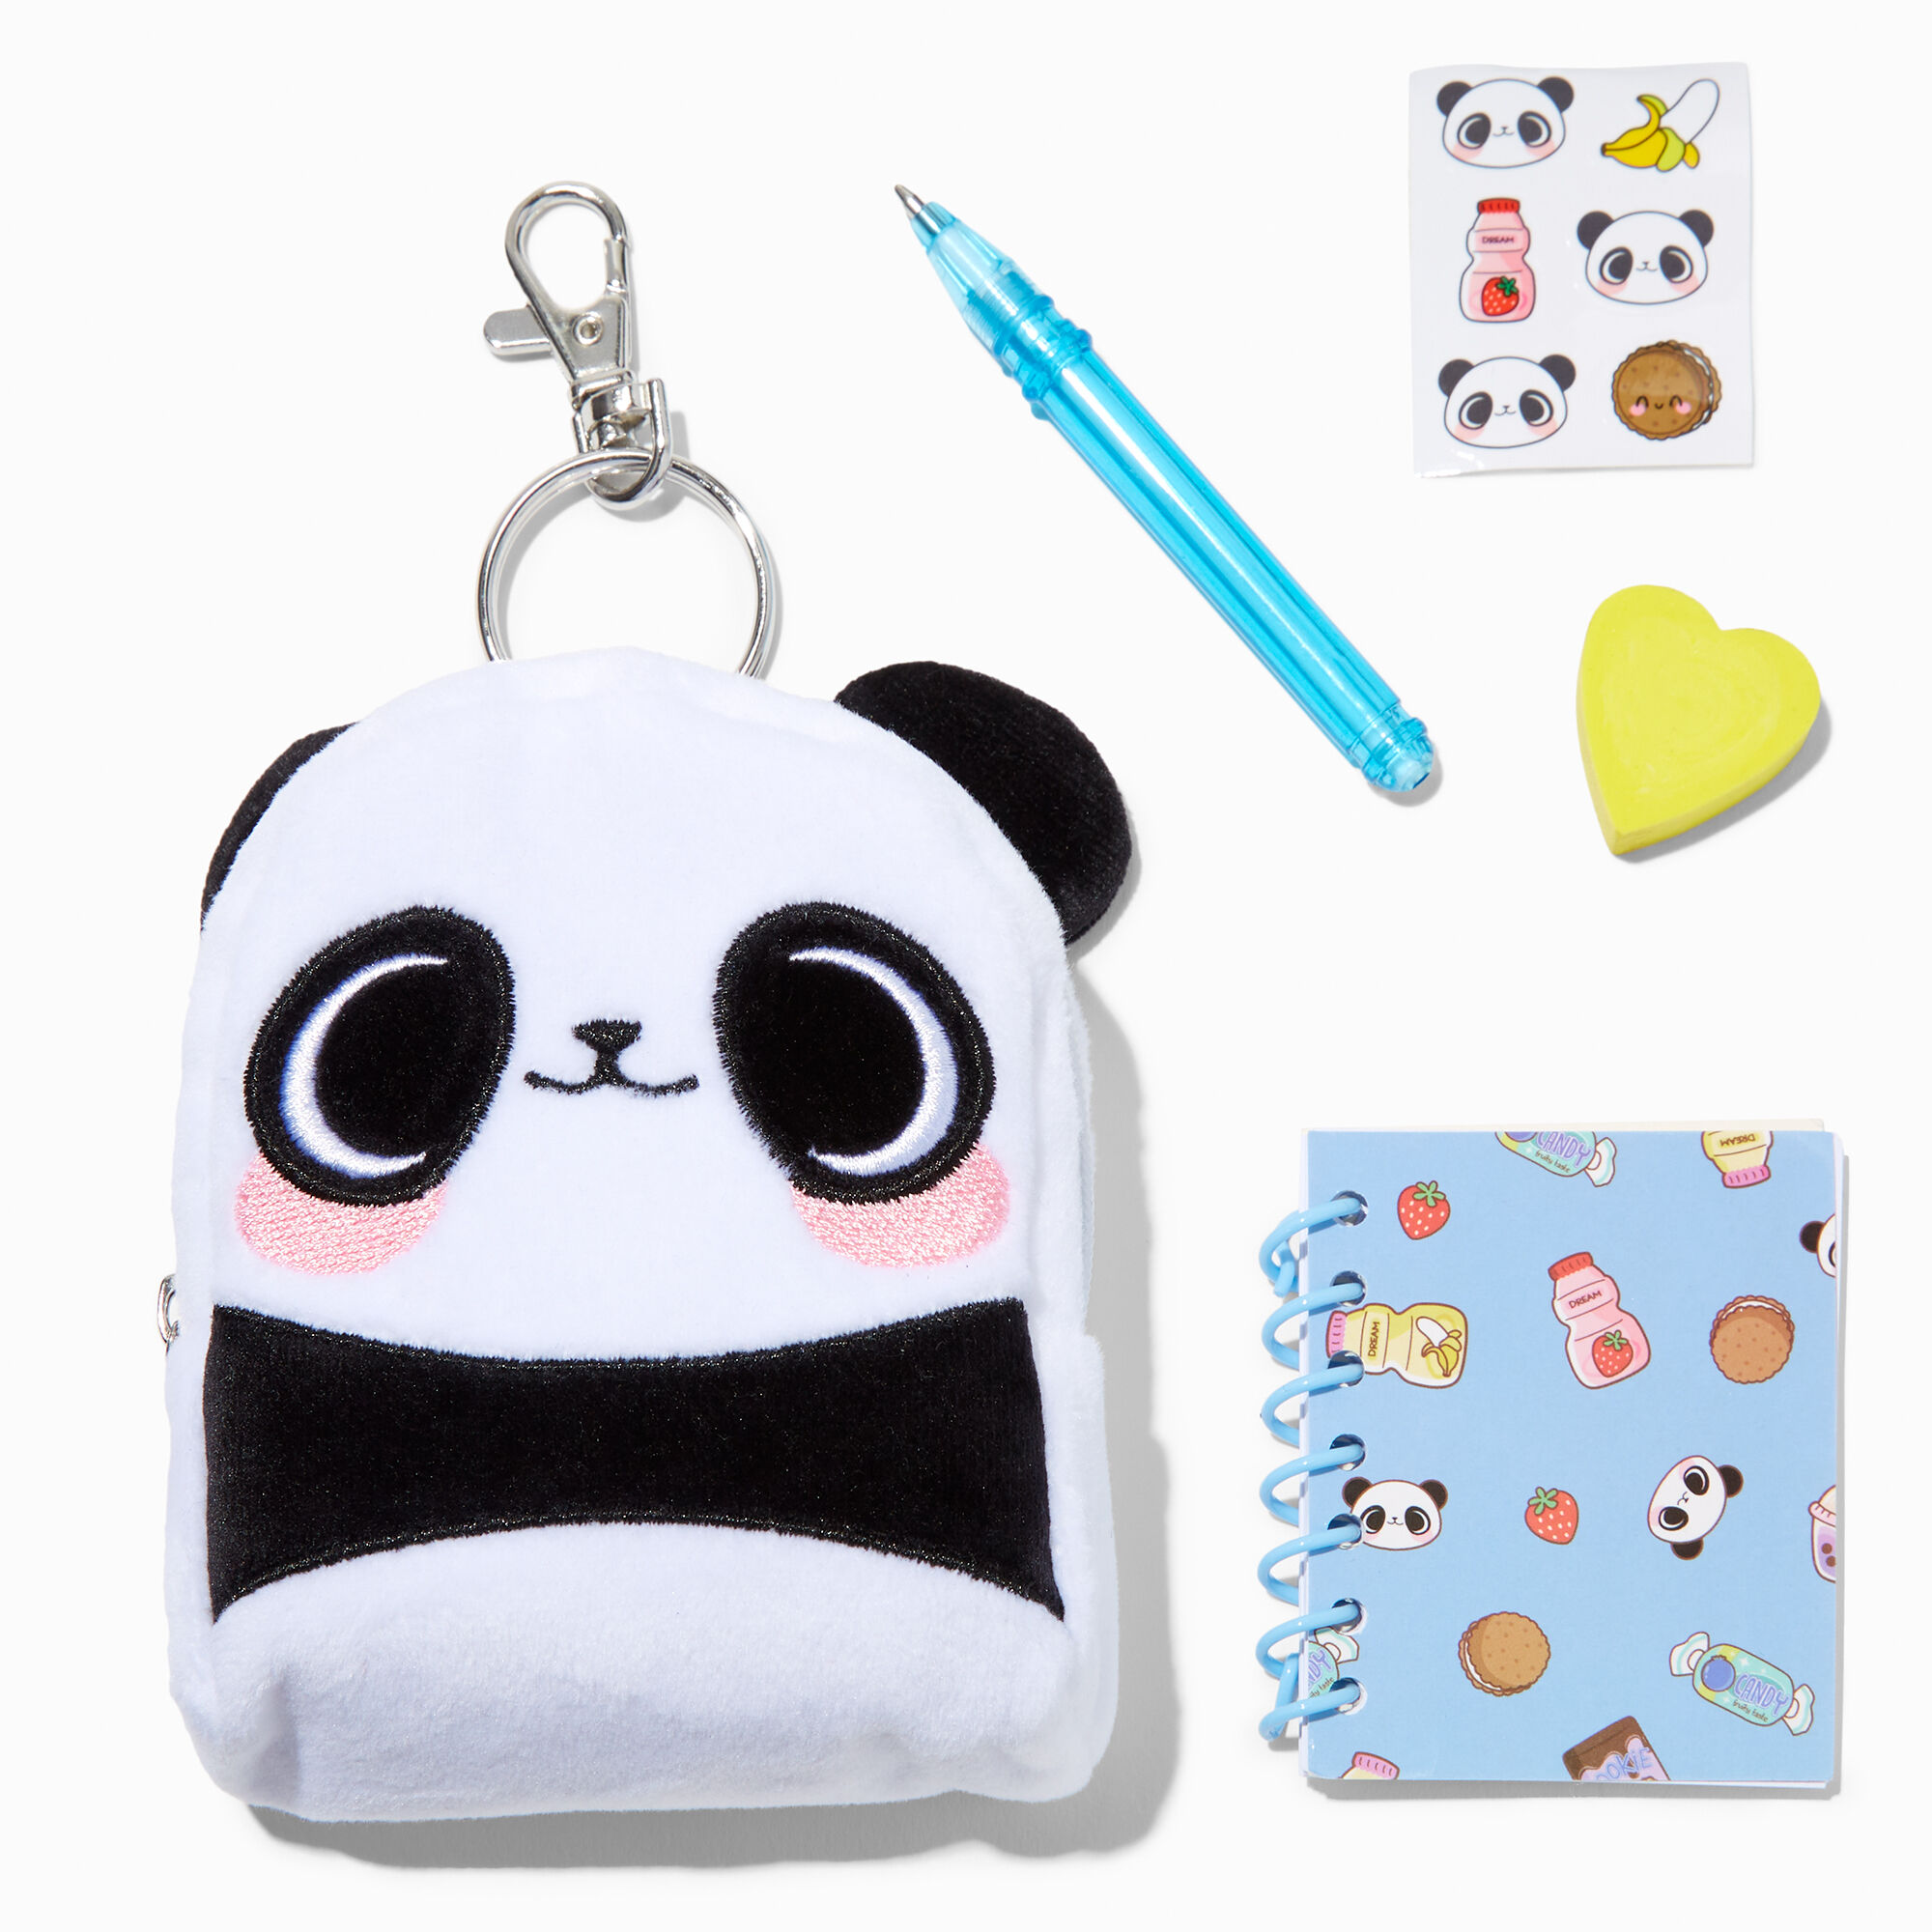 View Claires Panda 4 Backpack Stationery Set information